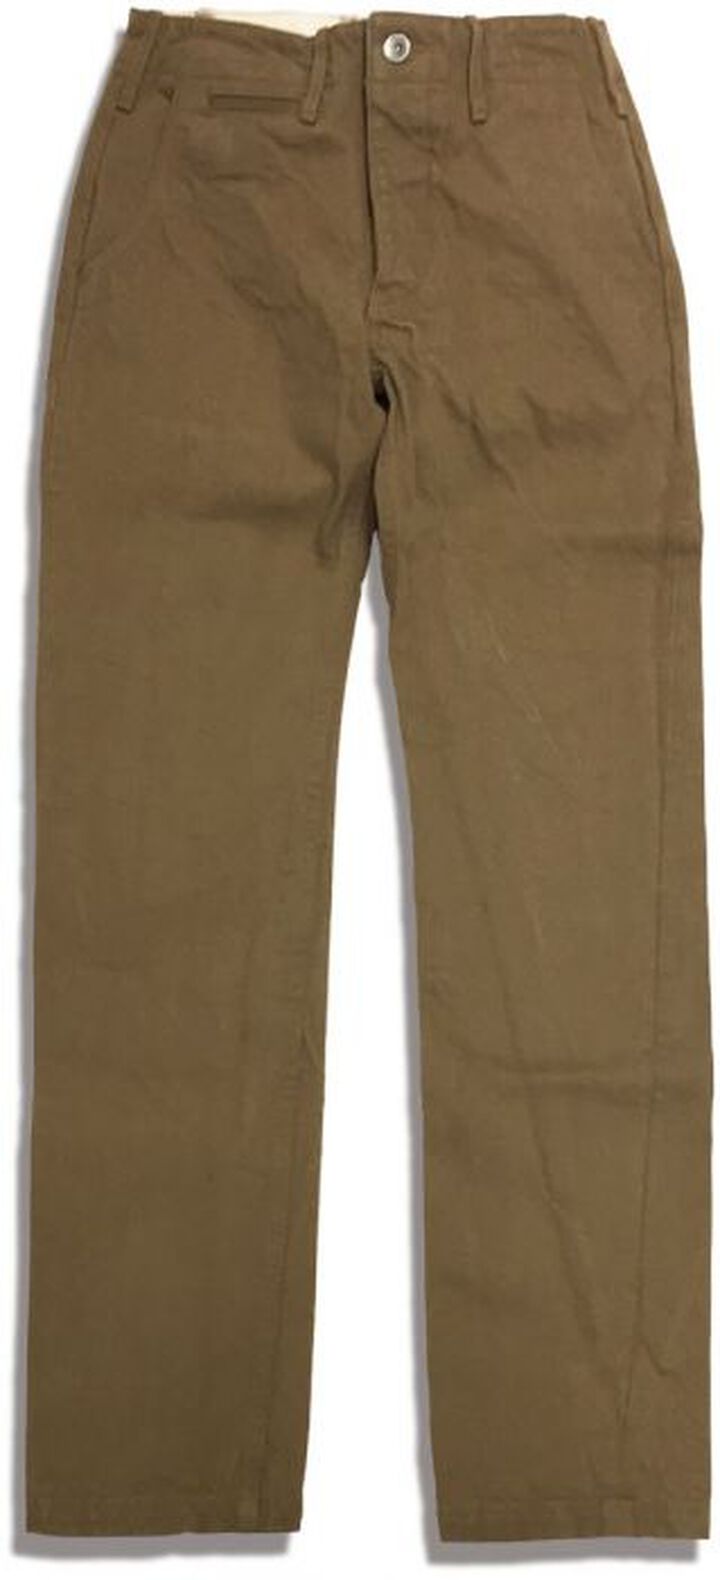 SJ42CP Chino Pants (One washed)